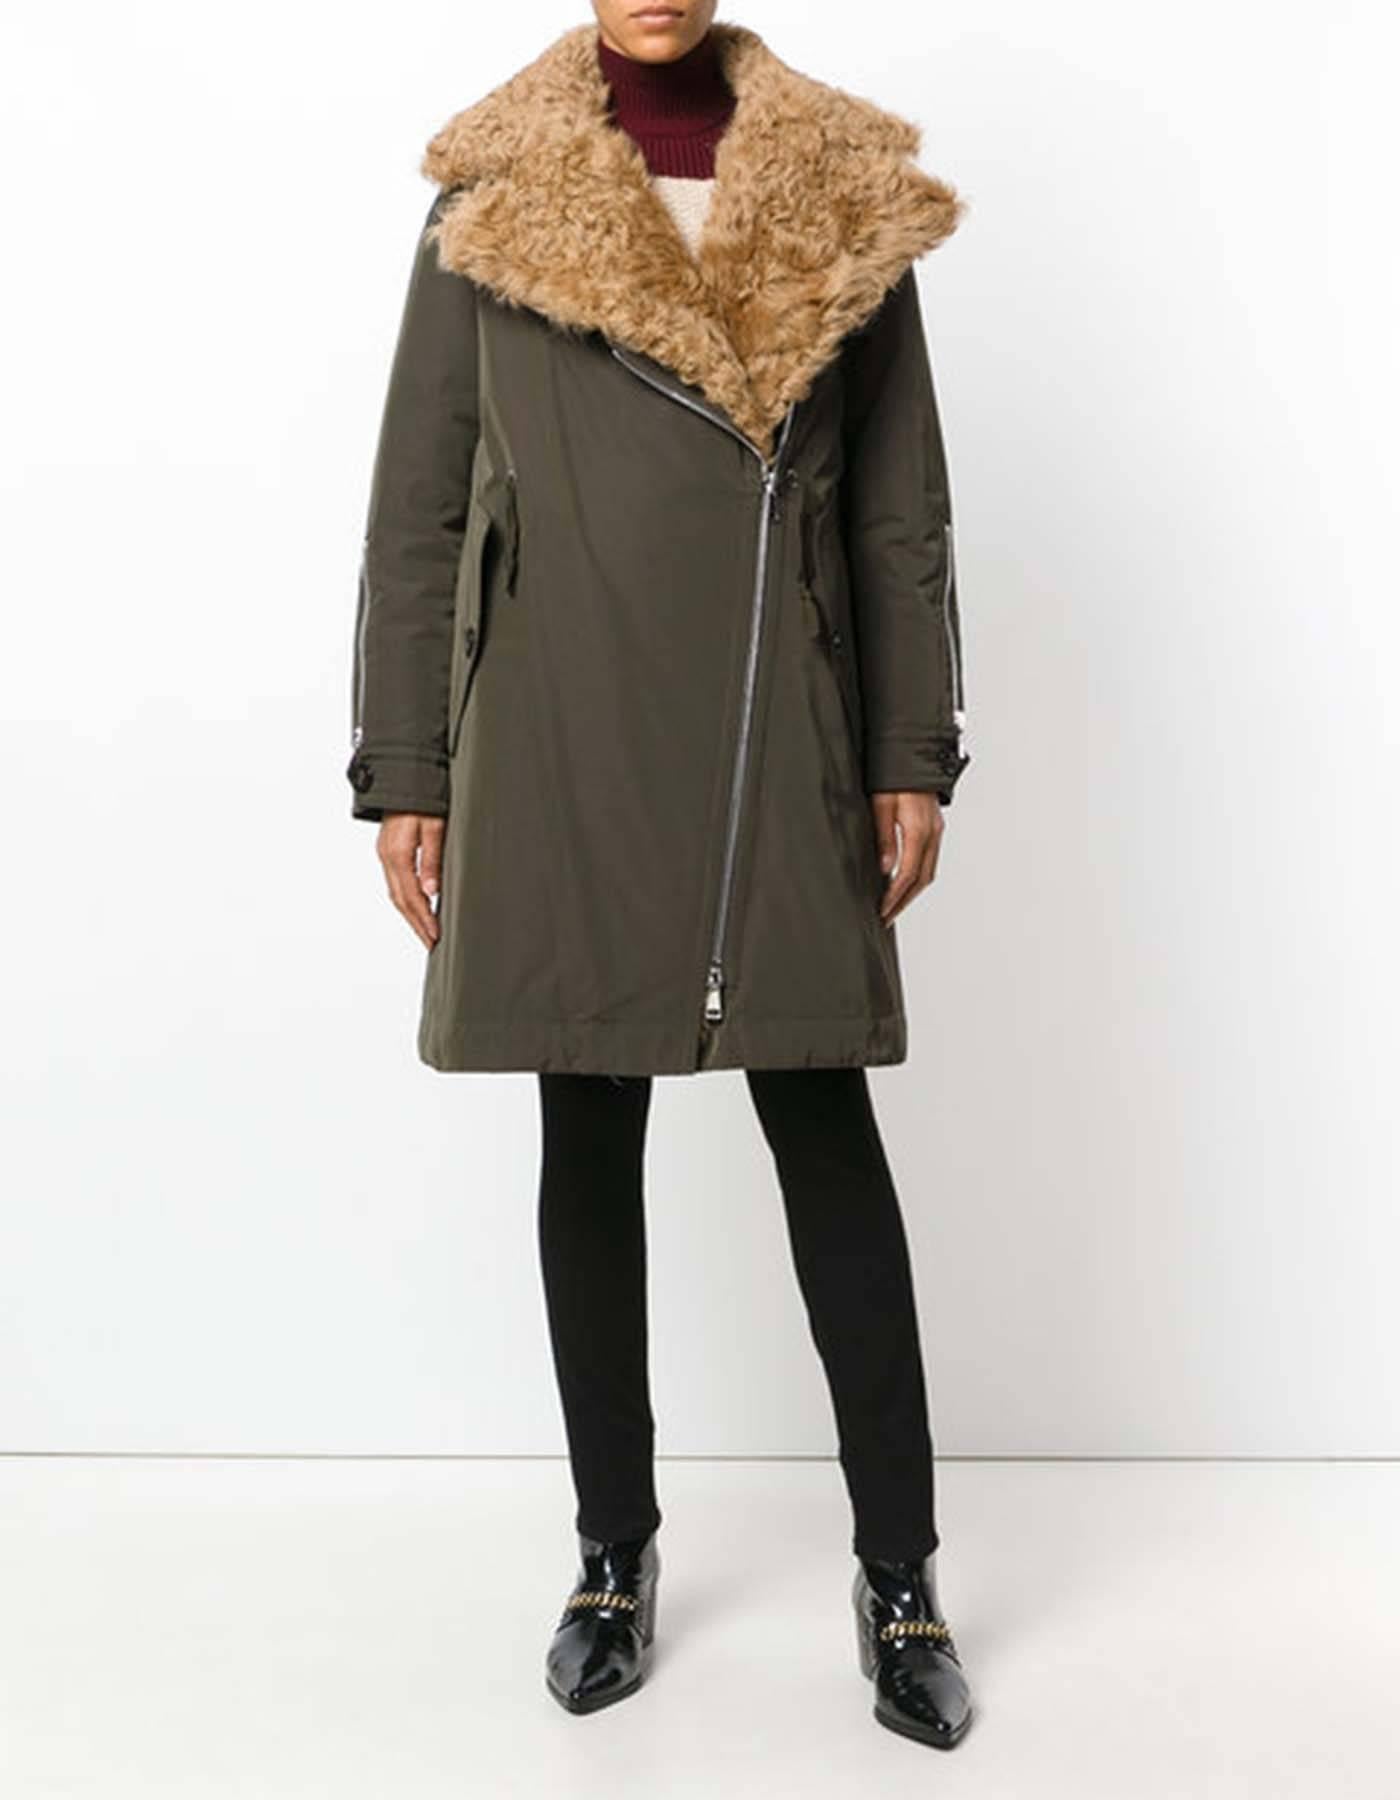 Moncler Olive Green Aucuba Shearling & Twill Oversized Down Coat Sz MONCLER 4

*MISSING INSERT*

Made In: Italy
Year Of Production: 2018
Color: Olive Green
Composition: 70% polyester, 30% cotton
Lining: 100% nylon
Closure/Opening: Front zip